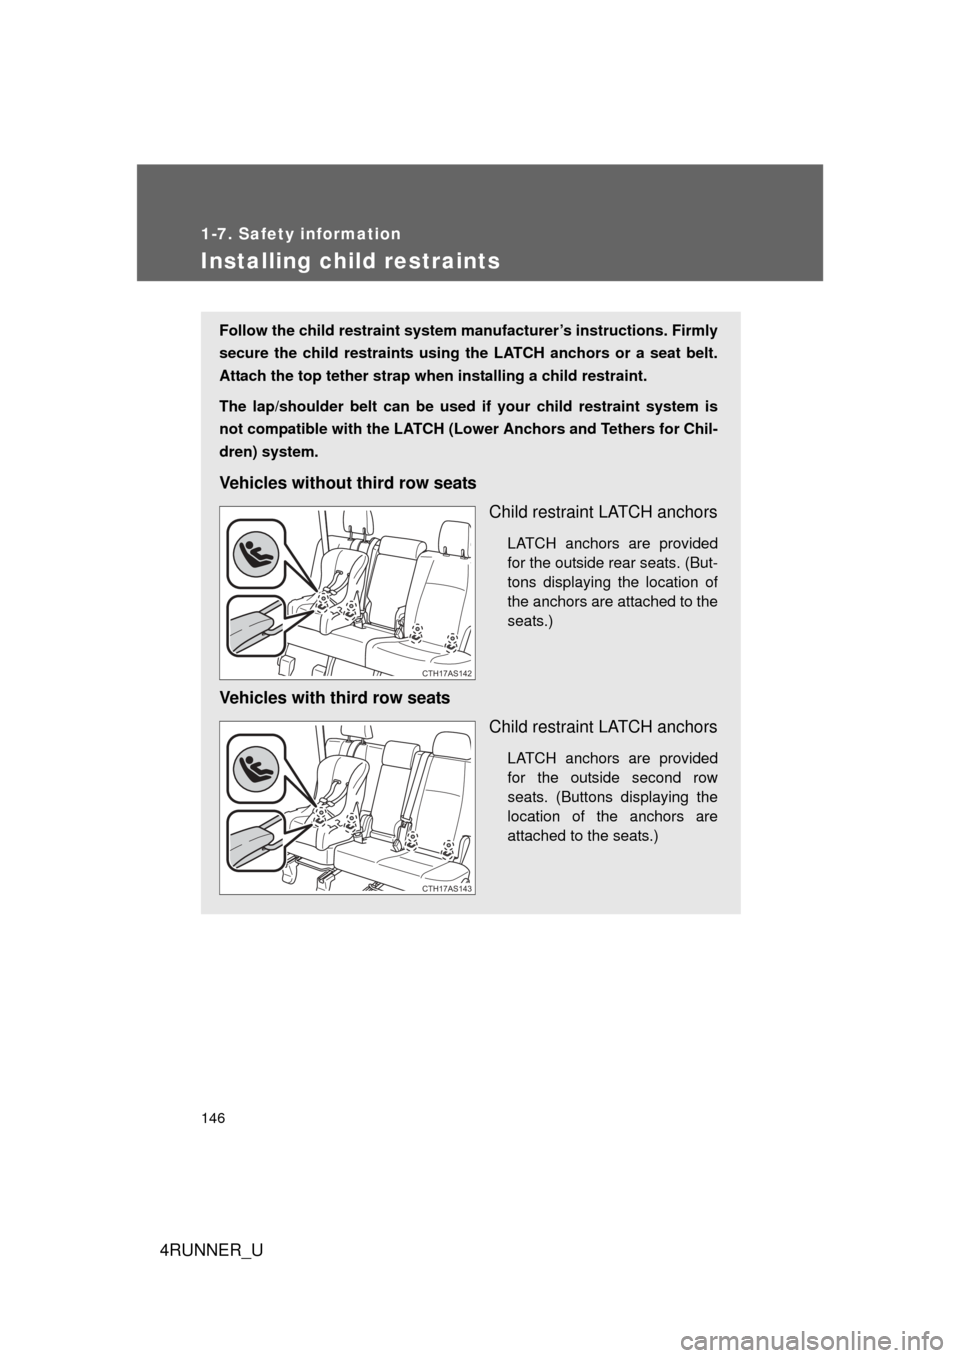 TOYOTA 4RUNNER 2012 N280 / 5.G Owners Manual 146
1-7. Safety information
4RUNNER_U
Installing child restraints
Follow the child restraint system manufacturer’s instructions. Firmly
secure the child restraints using the LATCH anchors or a seat 